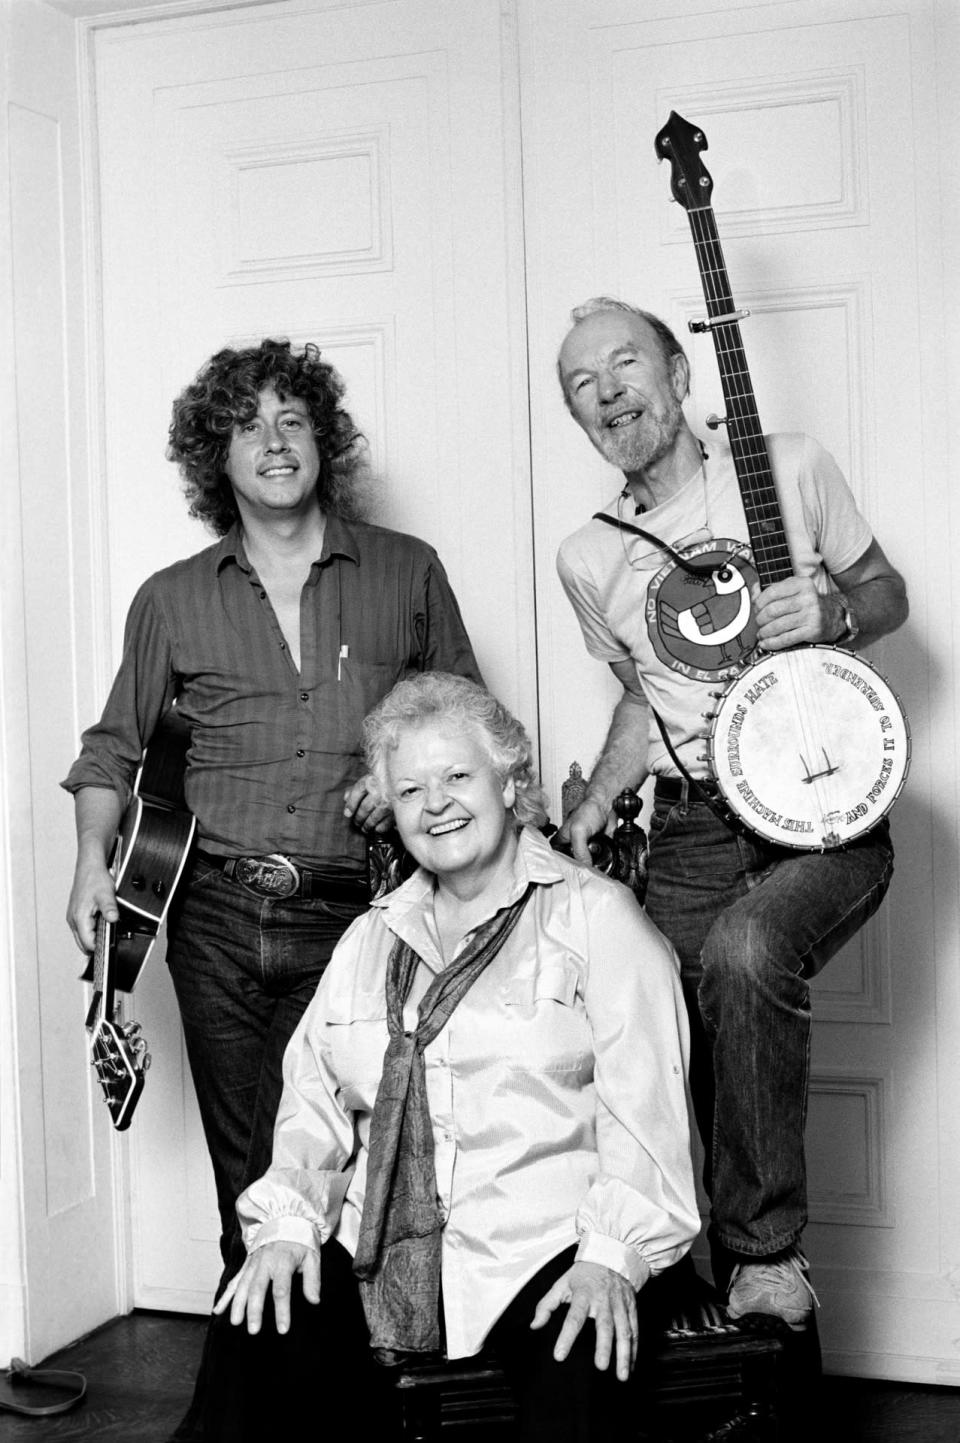 Ronnie Gilbert (Center) was a folk singer and political activist who was an original member of the Weavers with Pete Seeger, Lee Hays, and Fred Hellerman. Gilbert died June 6 at the age of 88.